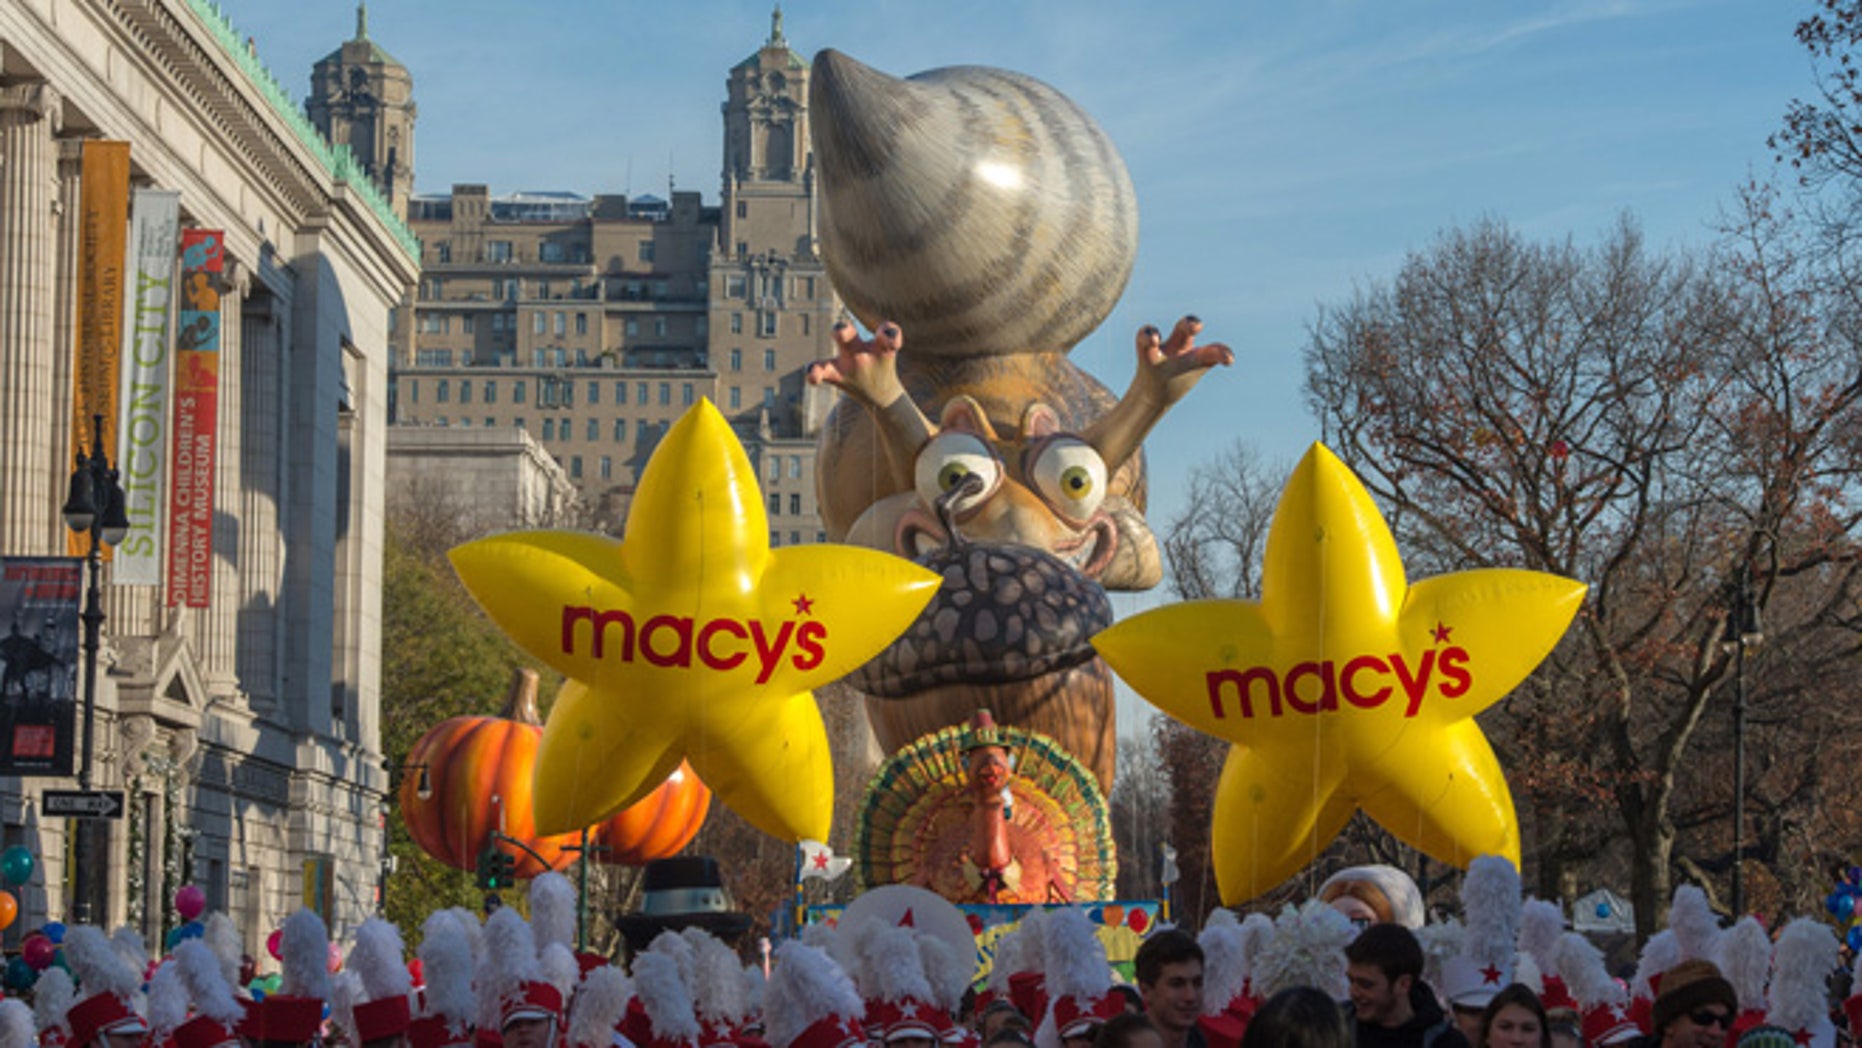 Macy's Thanksgiving Day Parade kicked off with giant balloons, floats